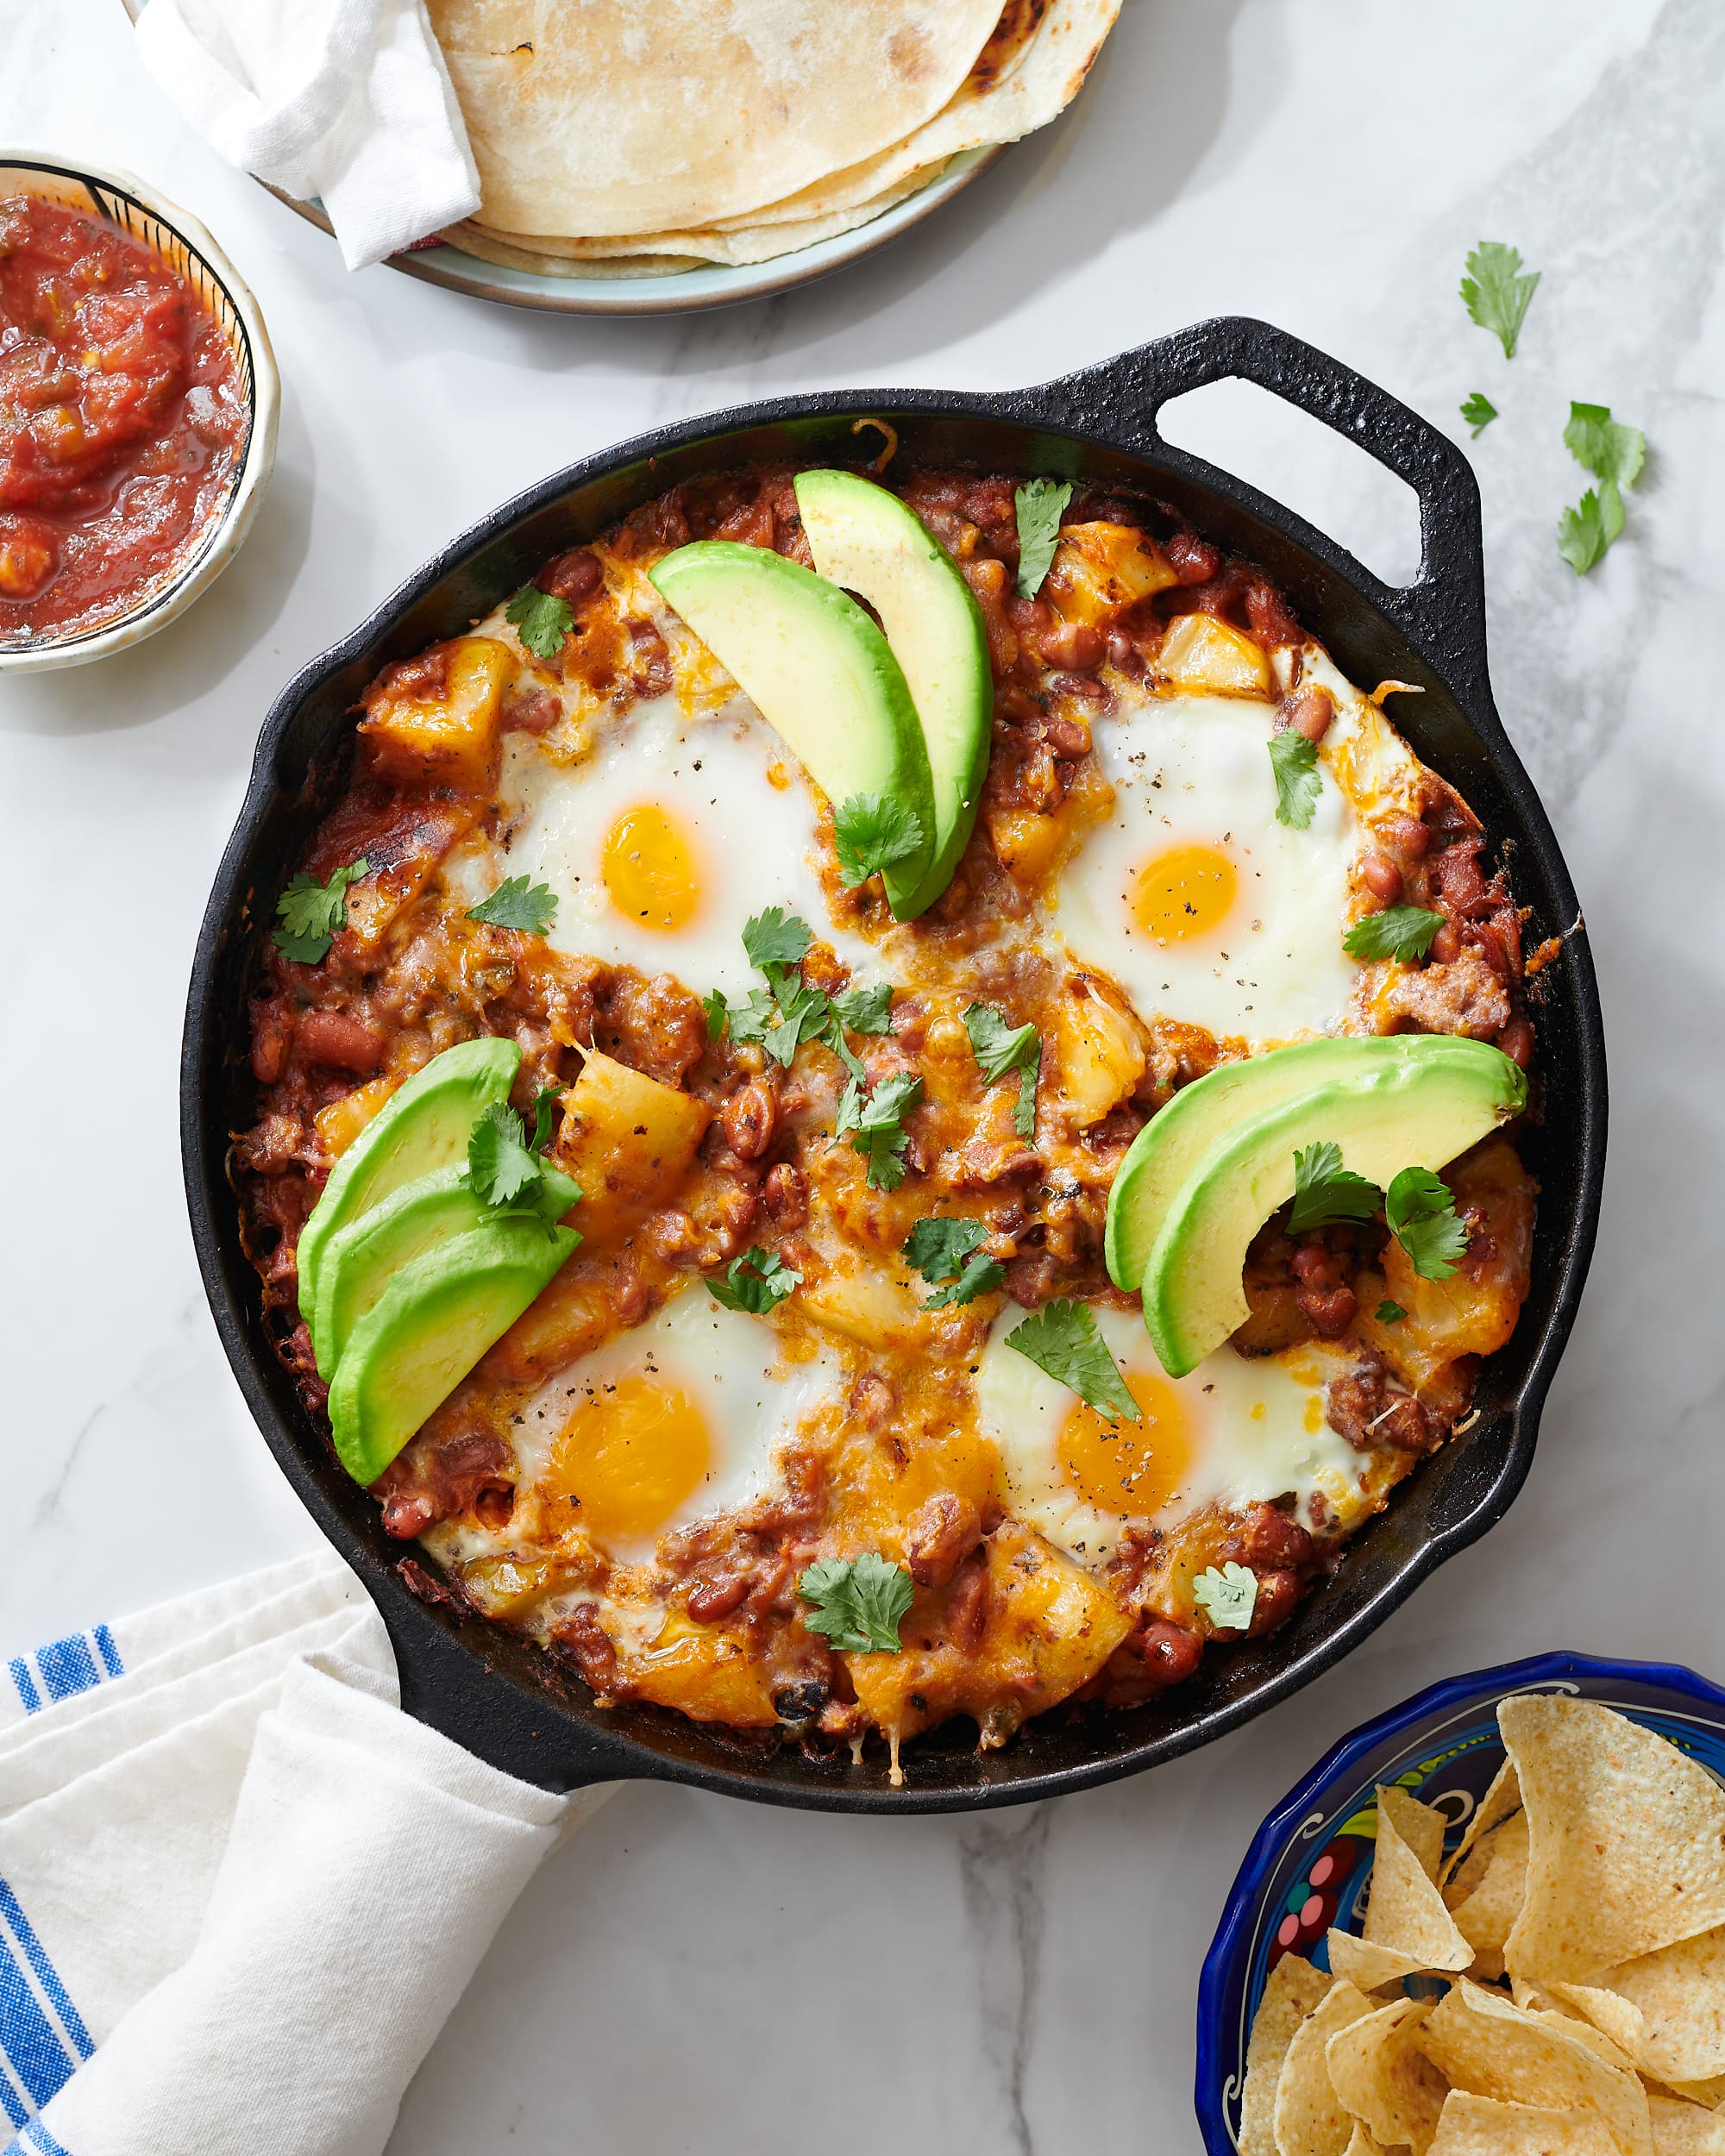 The Ultimate Breakfast Skillet with Roasted Potatoes and Eggs